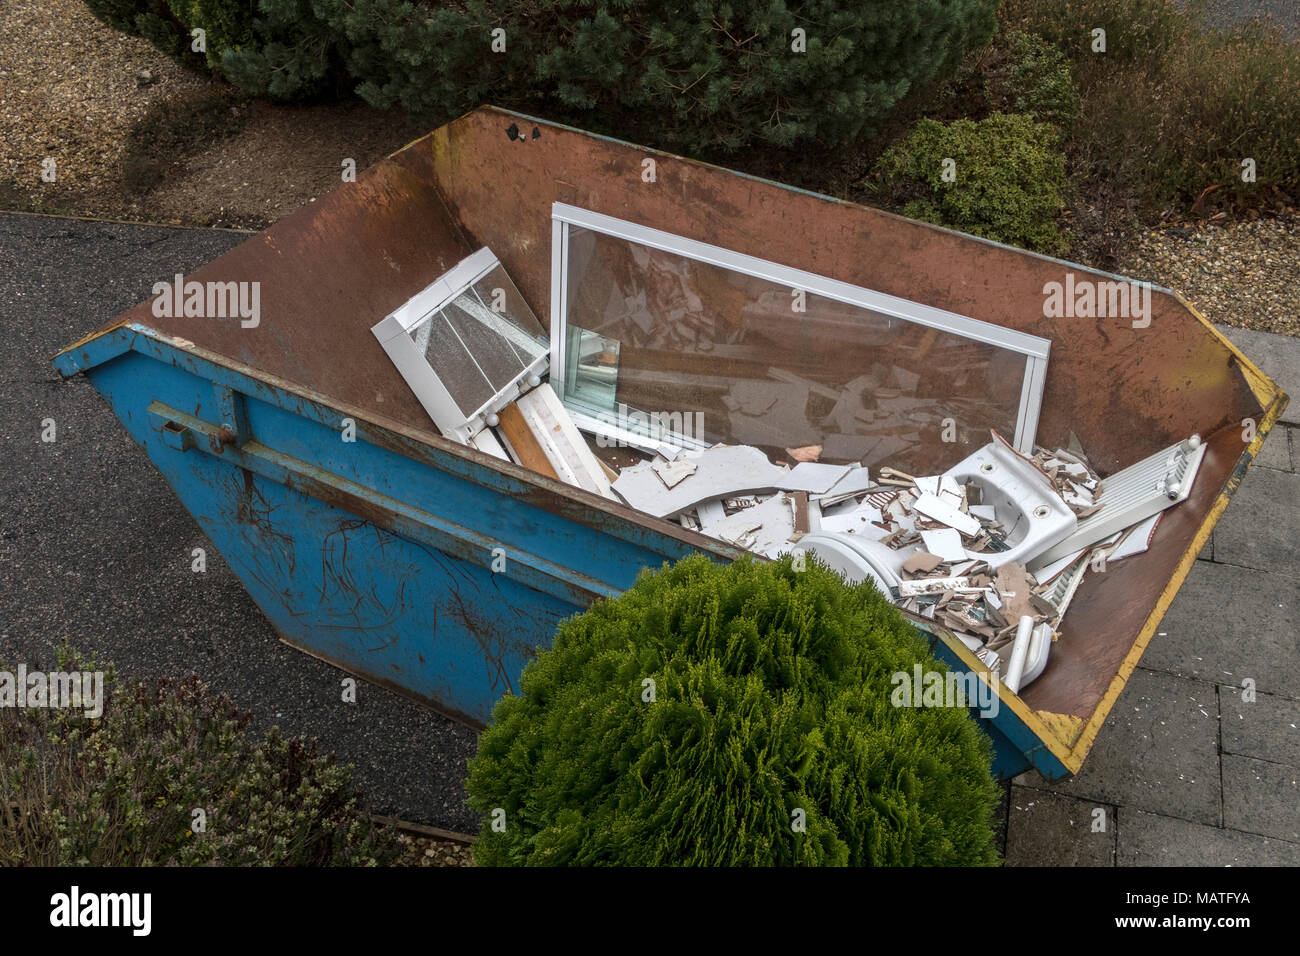 Rubbish skip on the driveway of a house, full of rubble from renovating a bathroom Stock Photo